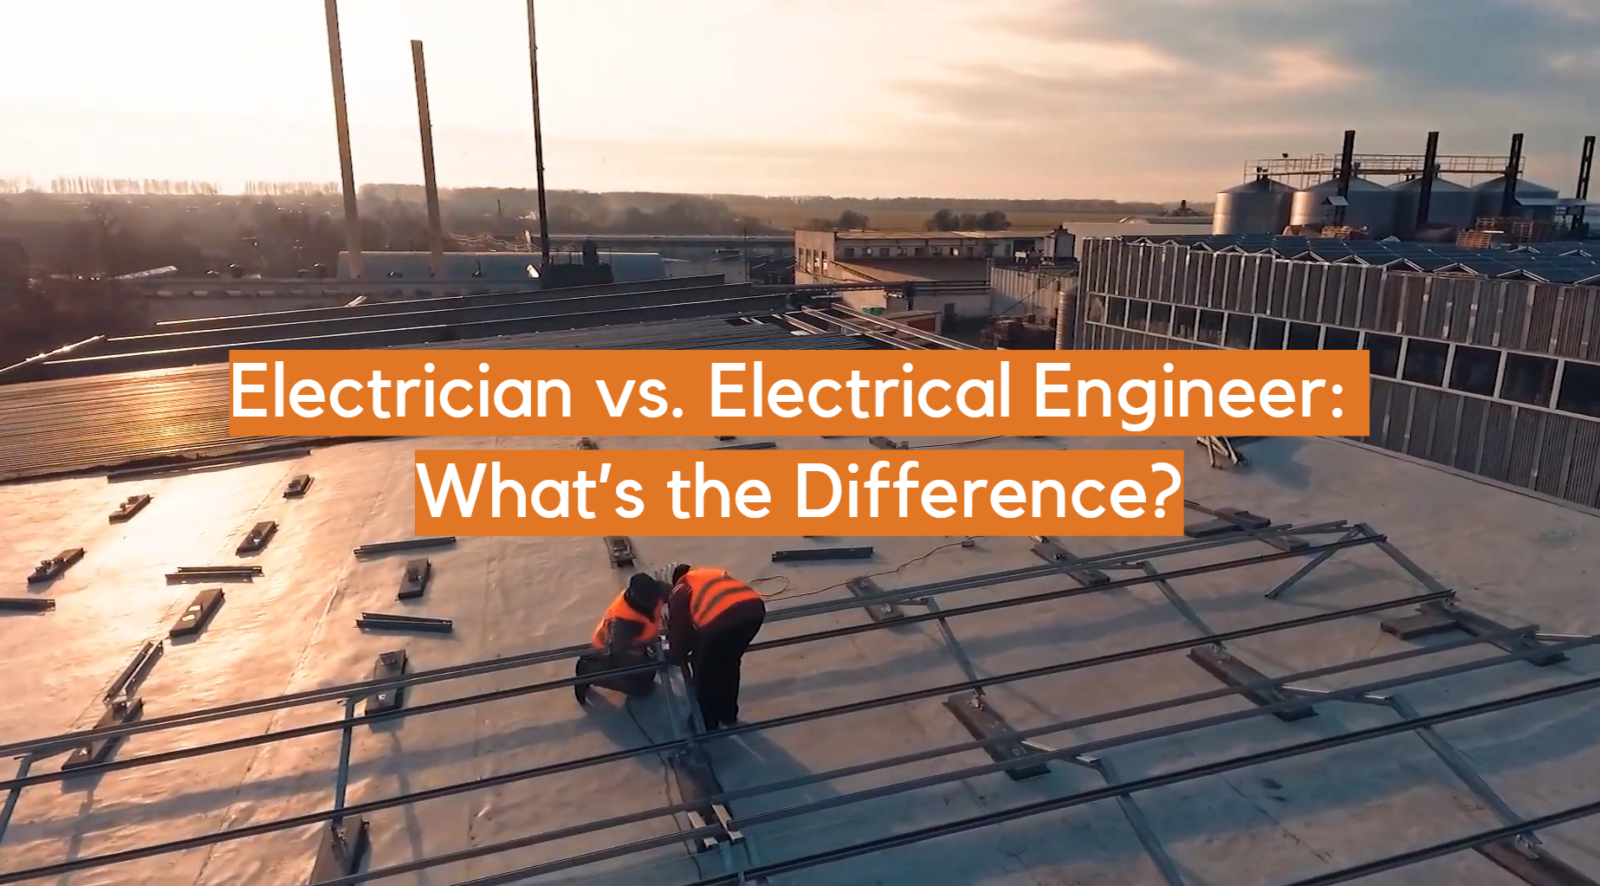 Electrician vs. Electrical Engineer: What’s the Difference?